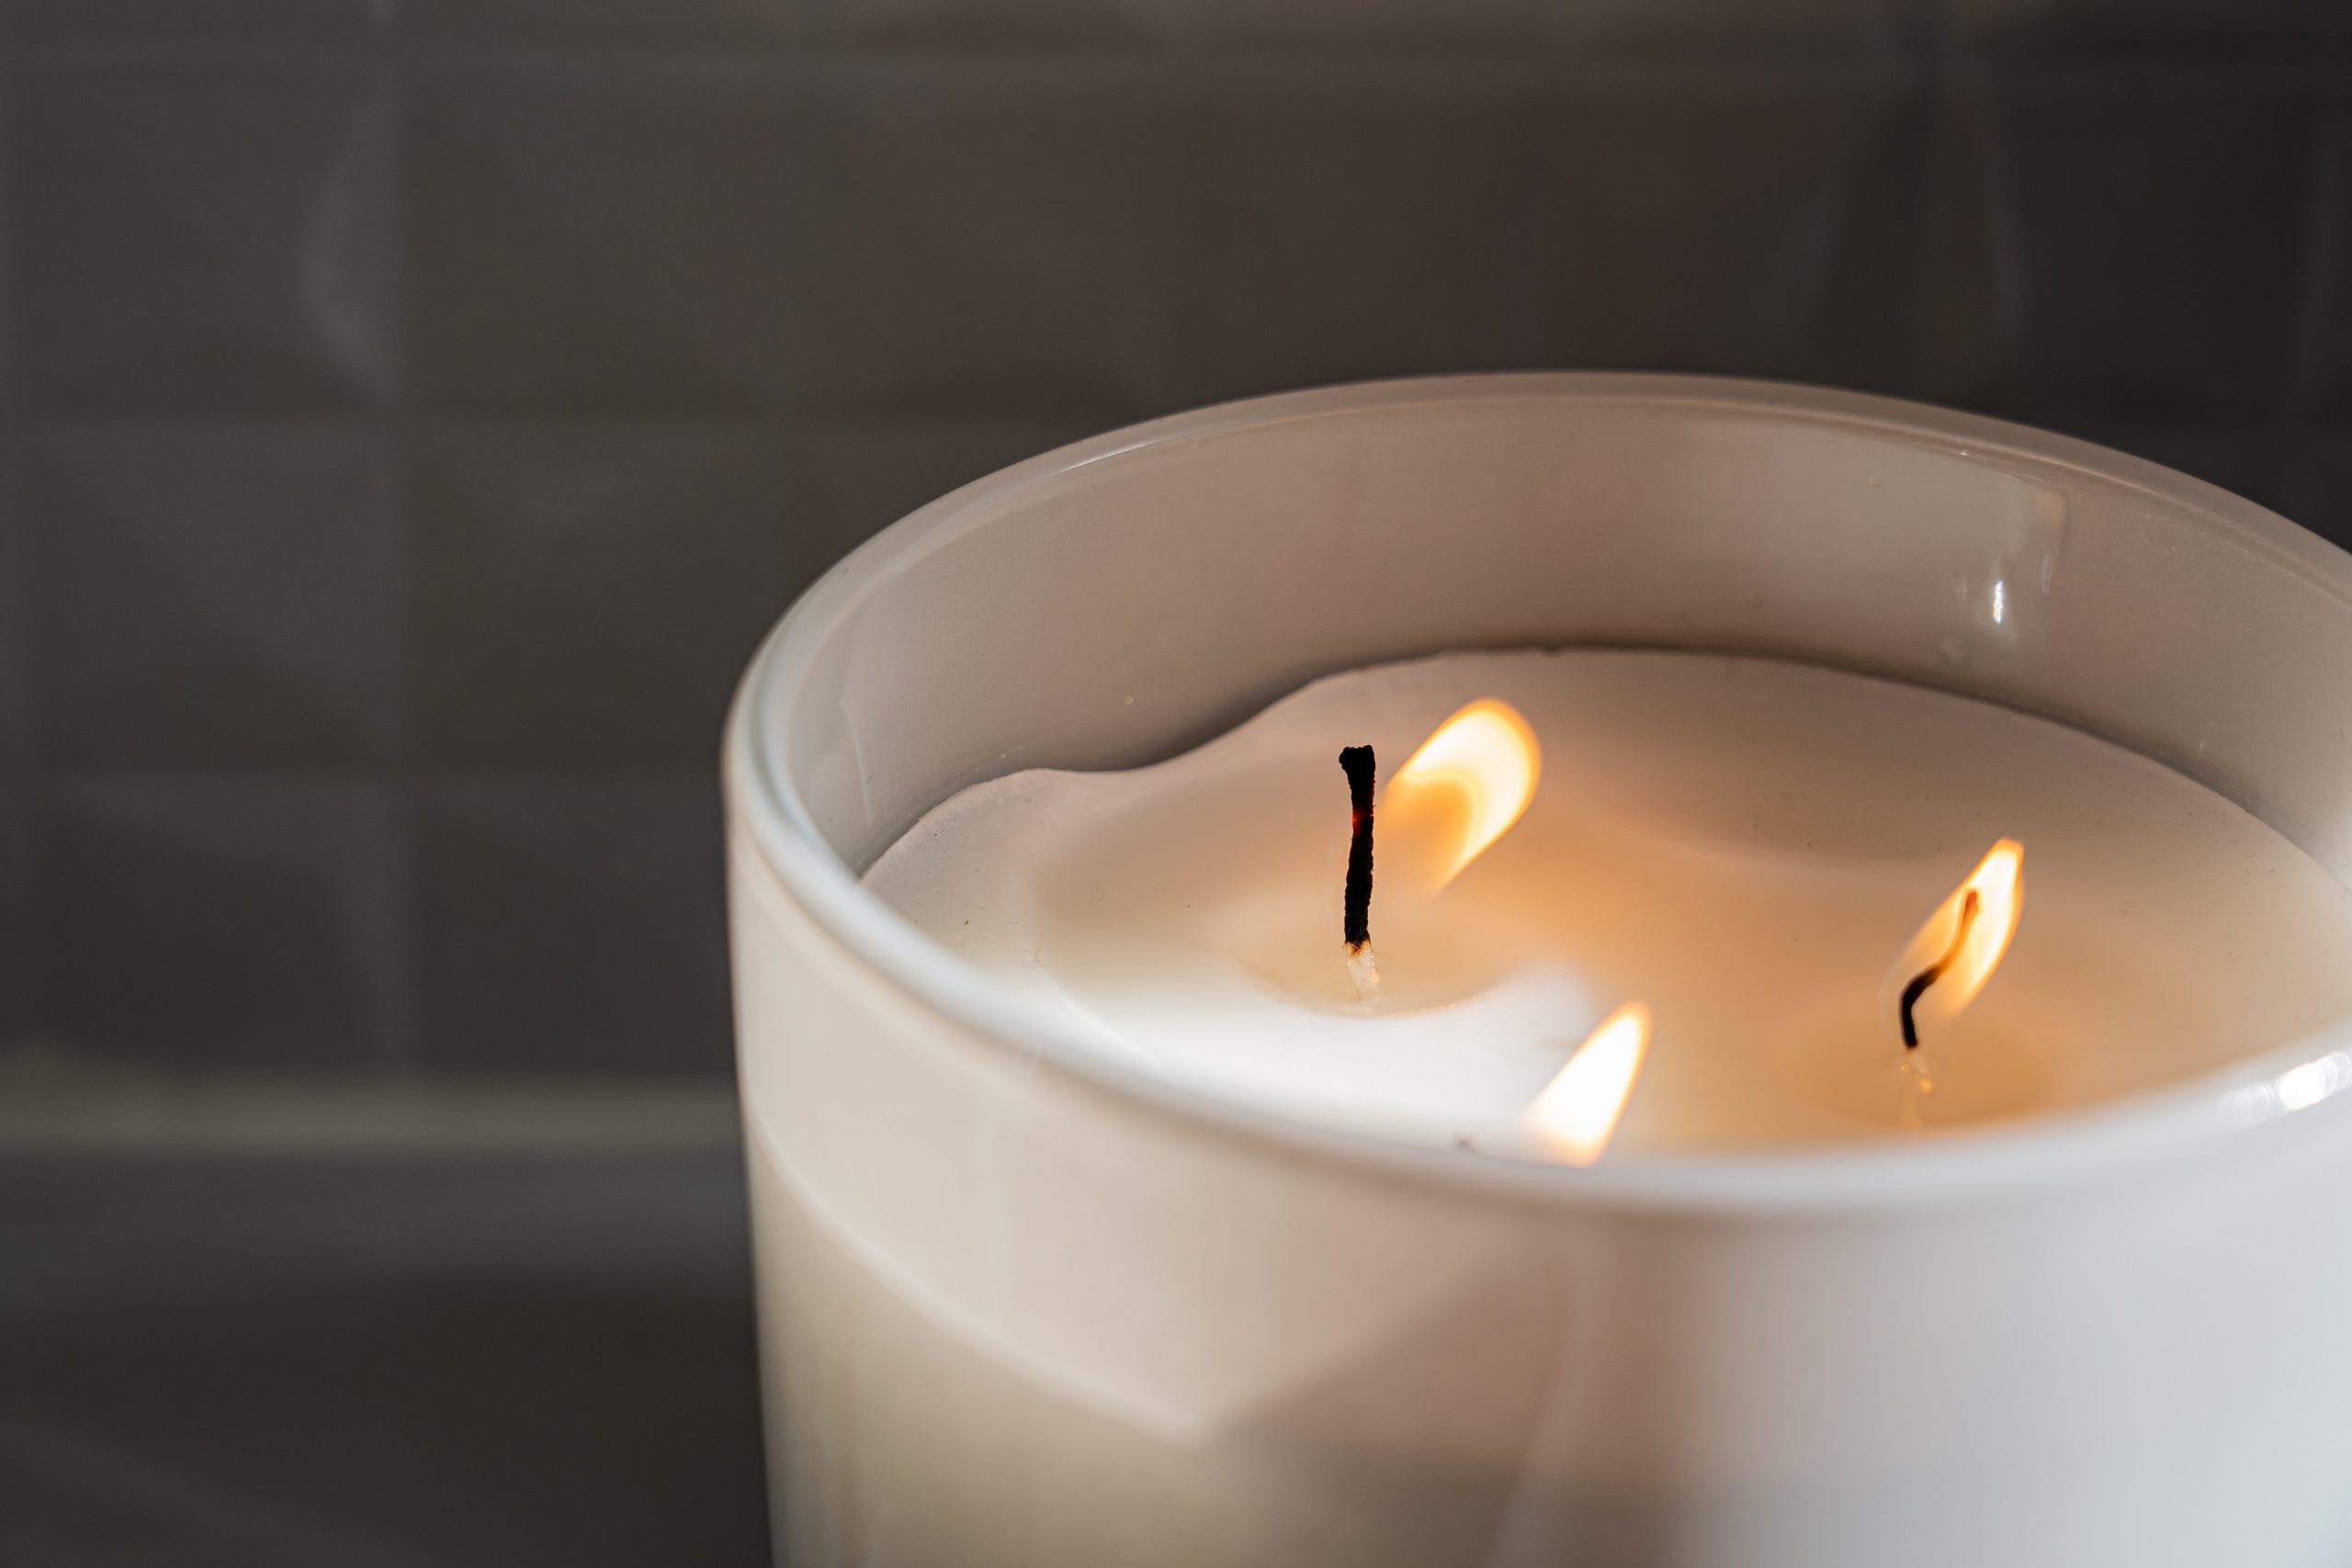 An image of a candle to talk about the dangerous toxins be emitted into the air by chemical candles with fragrances.